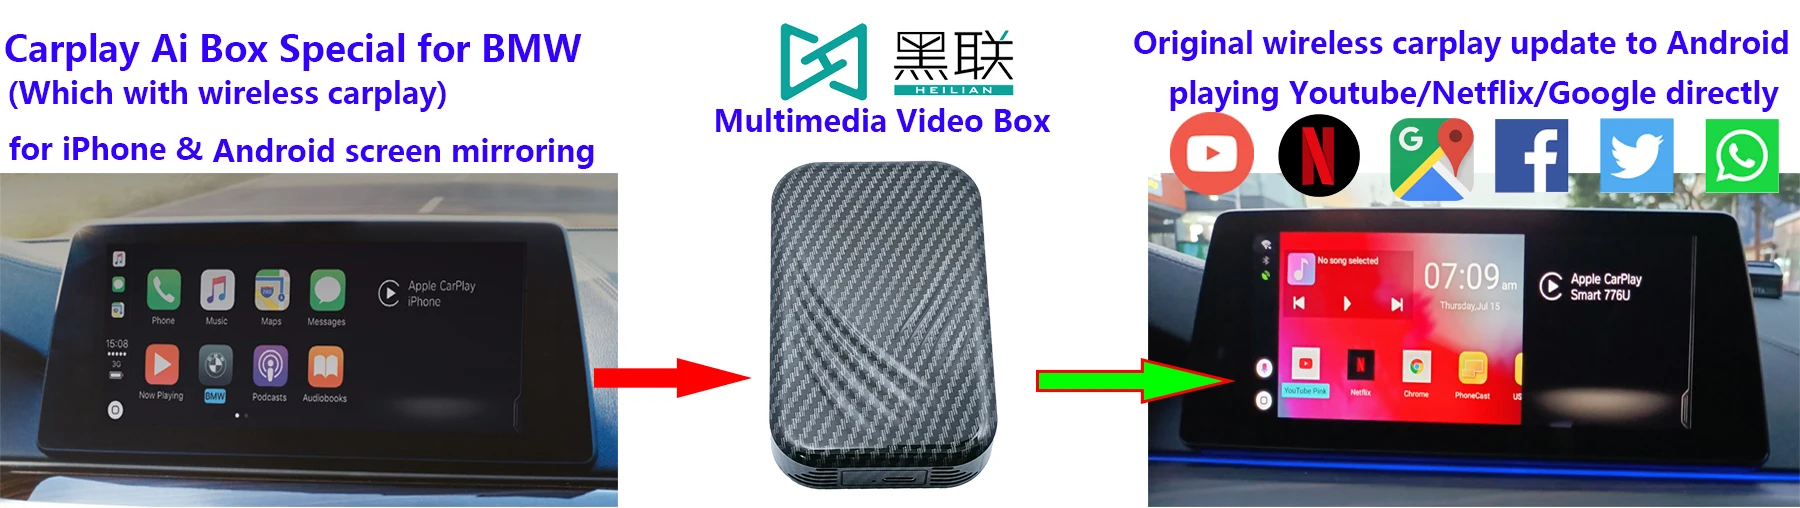 New Carplay Android Box For Bmw Stream Online Tv Netflix Youtube On Your Car Just Usb Plug In Buy Carplay Touch Usb Connection Original Car Update To Smart System Product On Alibaba Com